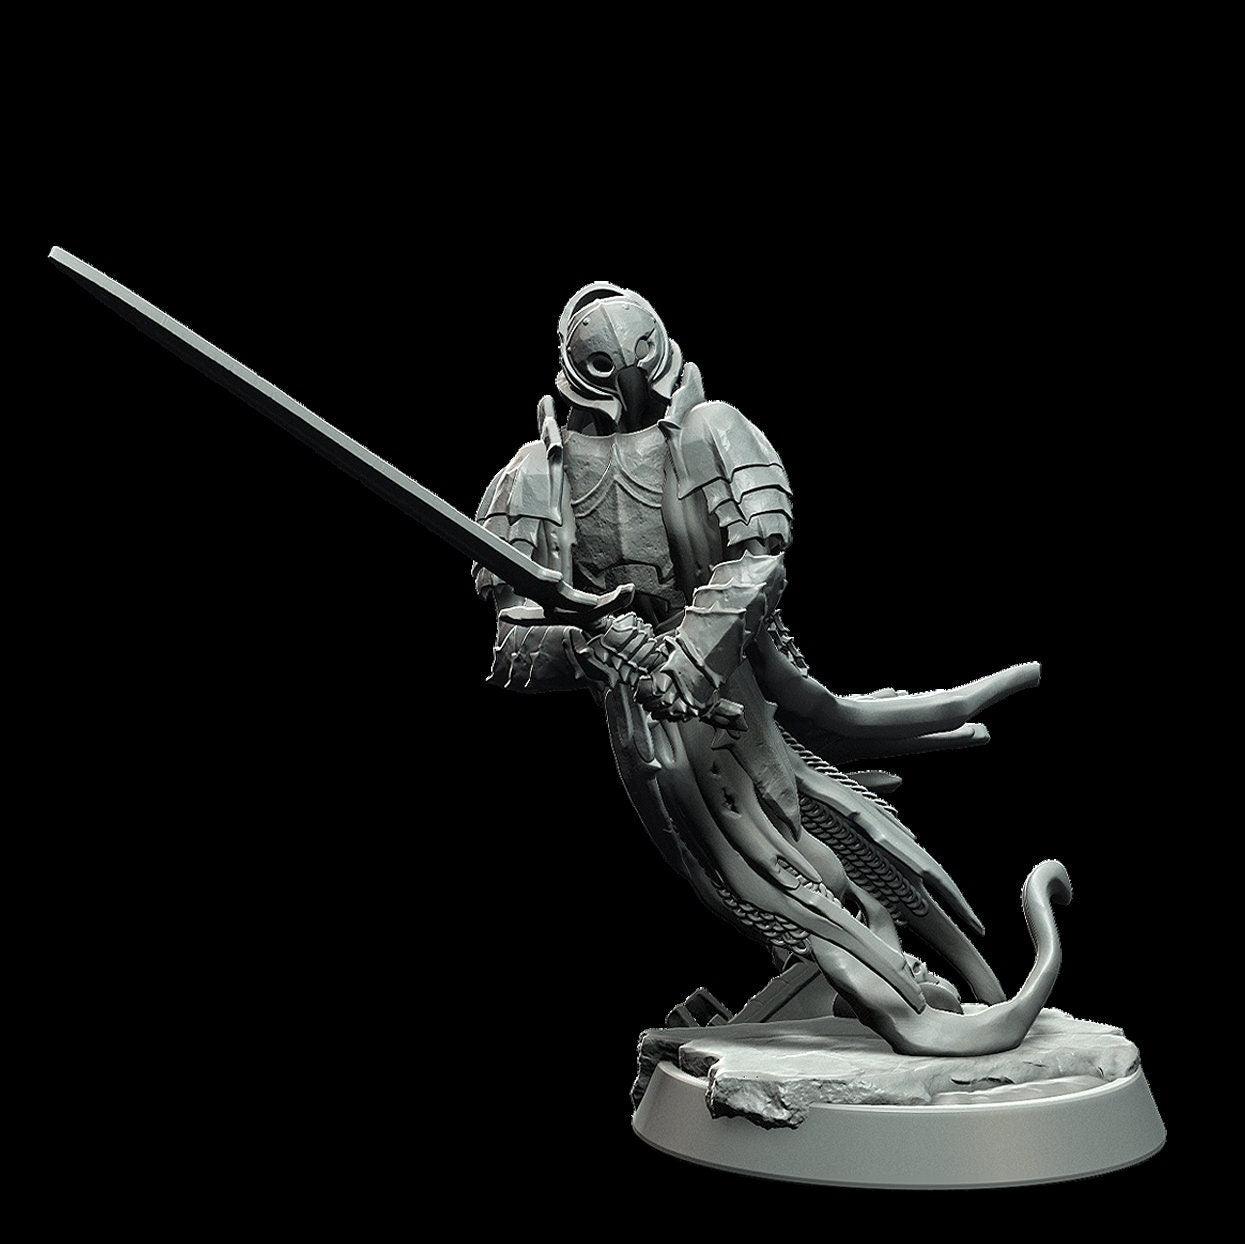 Undead Miniature Undead warrior Phantom Miniature - 3 Poses - 28mm scale Tabletop gaming DnD Miniature Dungeons and Dragons dnd 5e - Plague Miniatures shop for DnD Miniatures